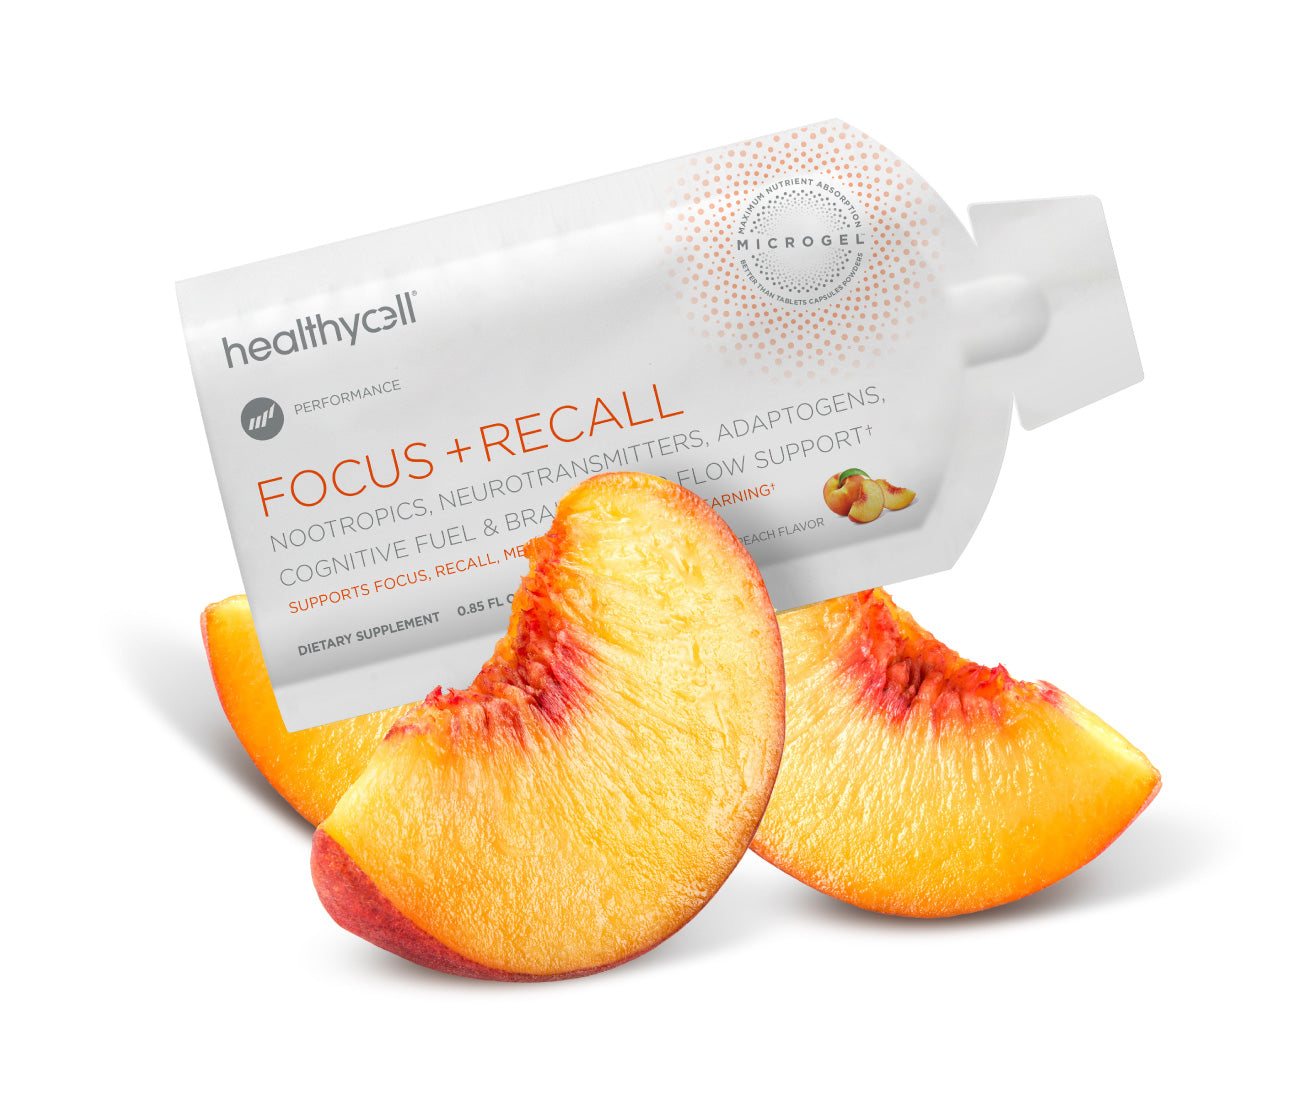  Focus + Recall by Healthycell Healthycell Perfumarie